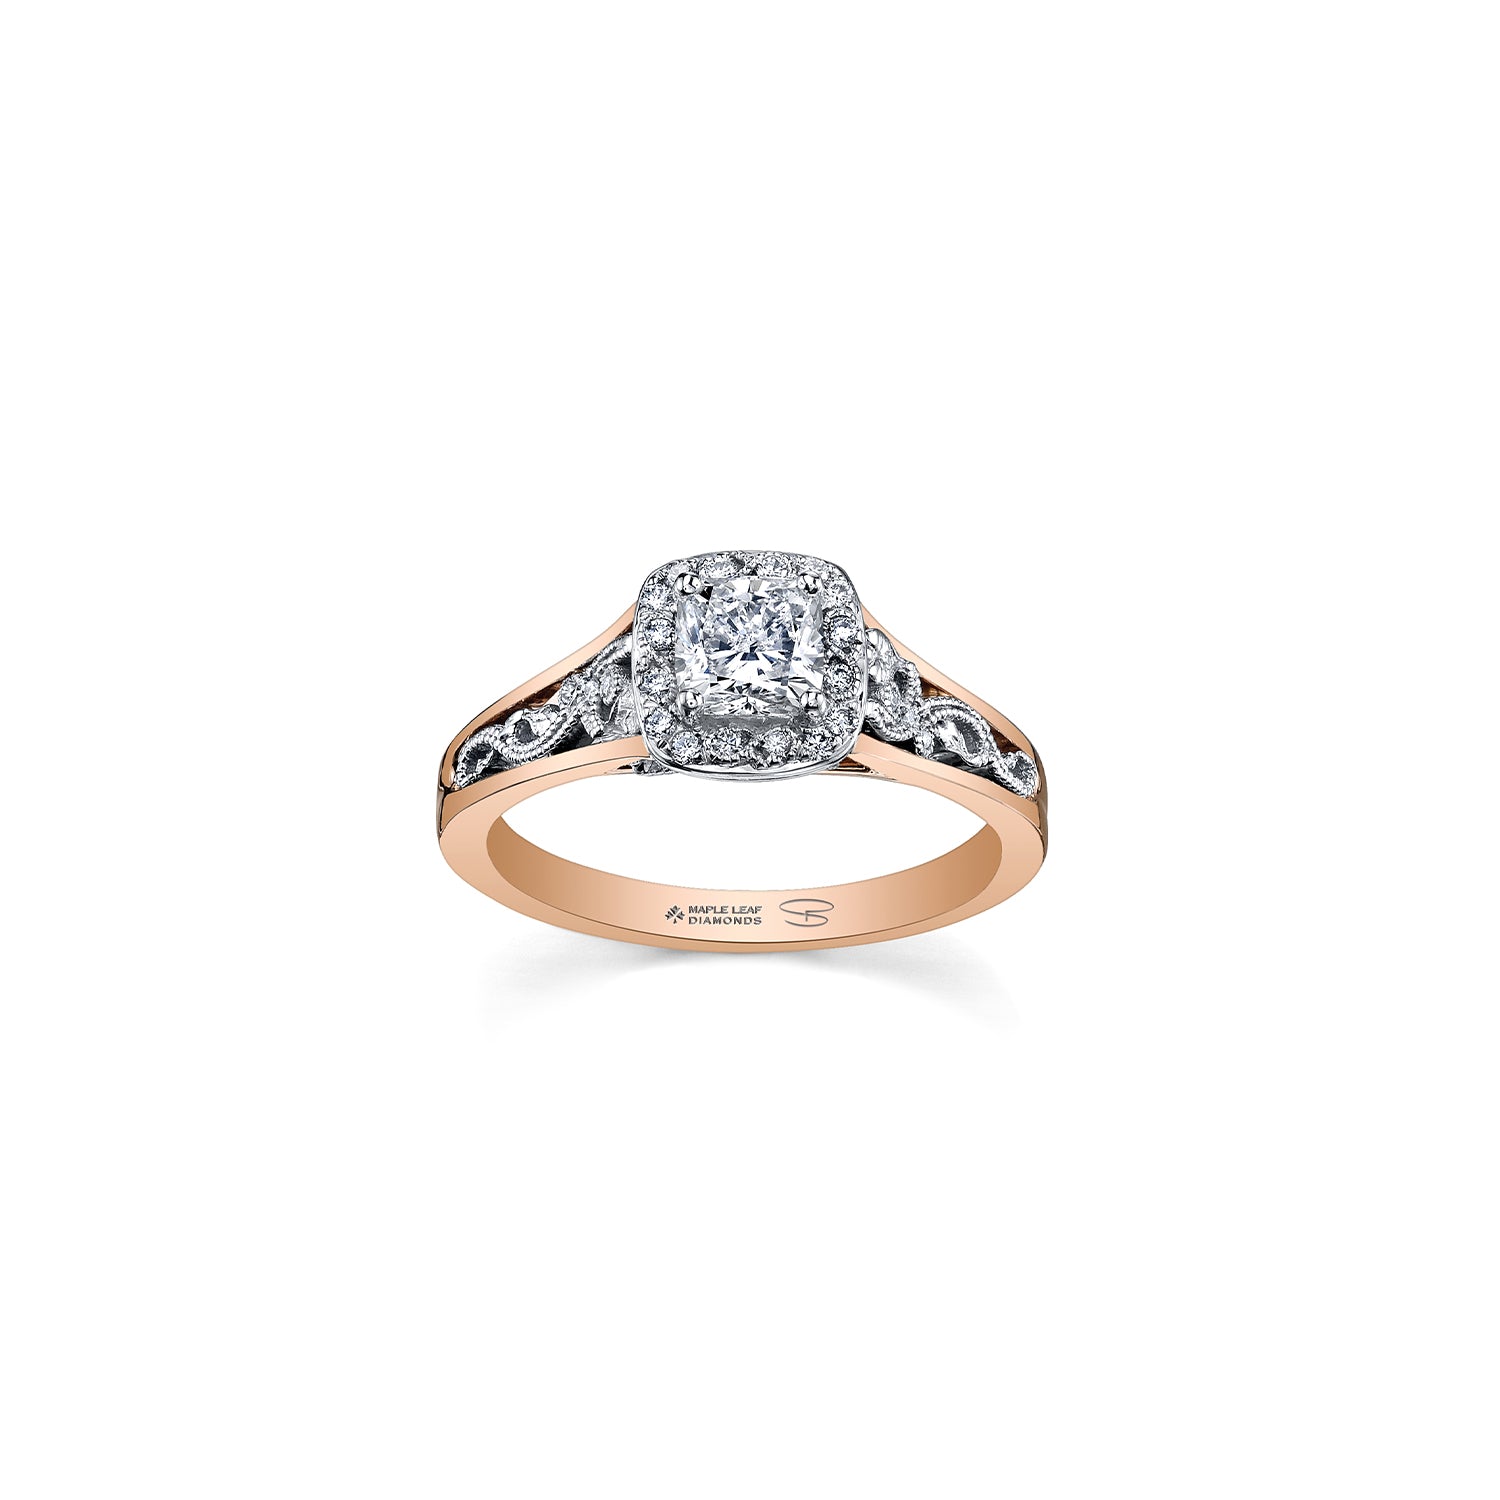 Crafted in 18KT white and rose Certified Canadian Gold, this engagement ring features a diamond halo with a cushion-cut Canadian centre diamond on a diamond set band with a rose vine design. 